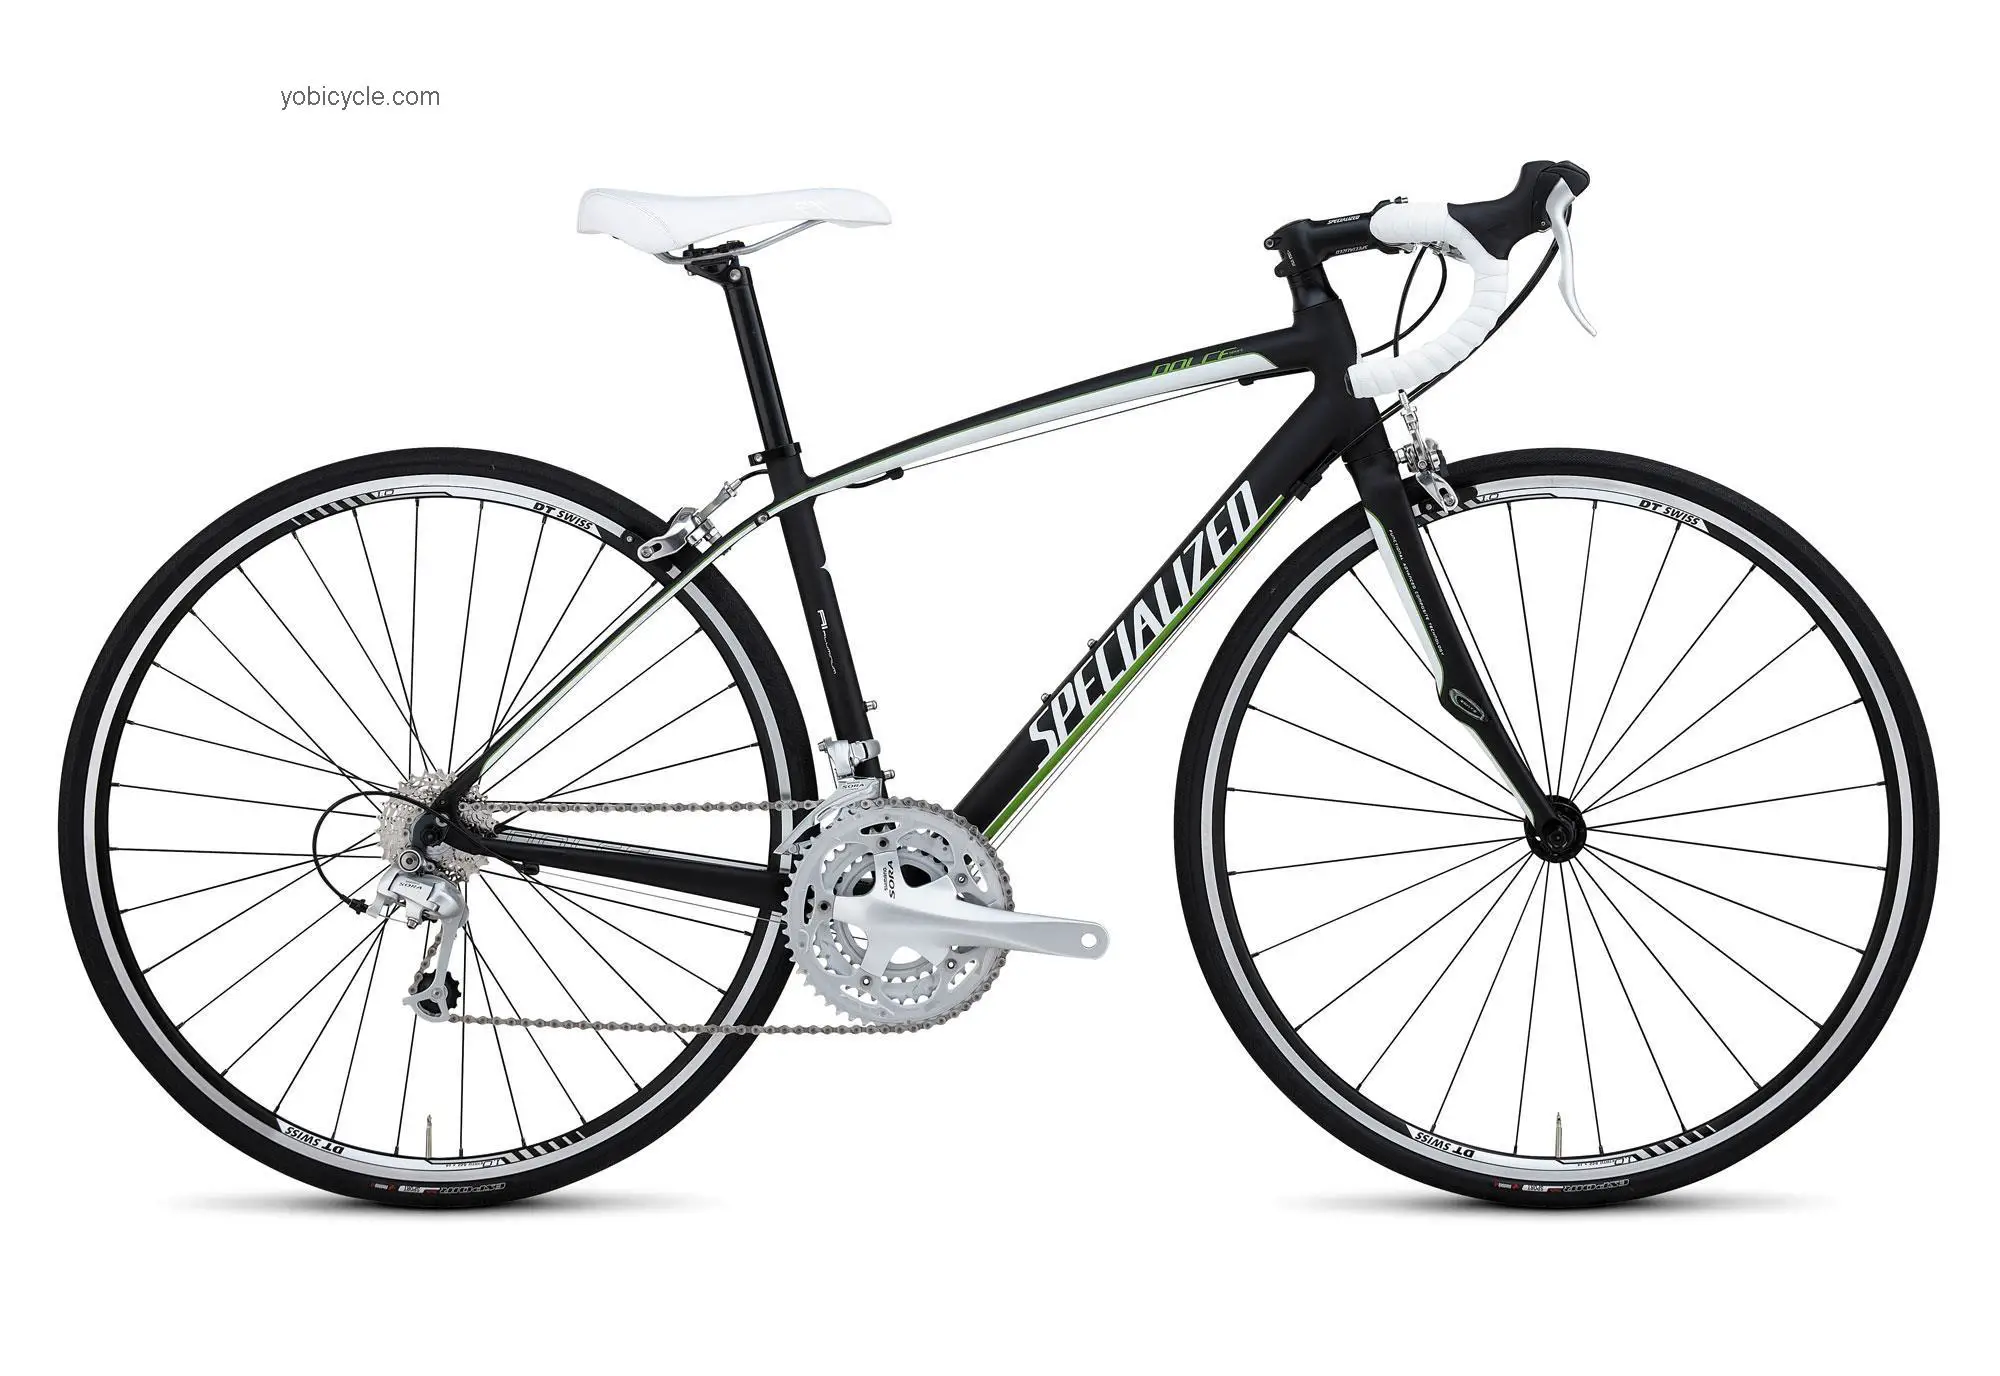 Specialized Dolce Sport Triple 2012 comparison online with competitors